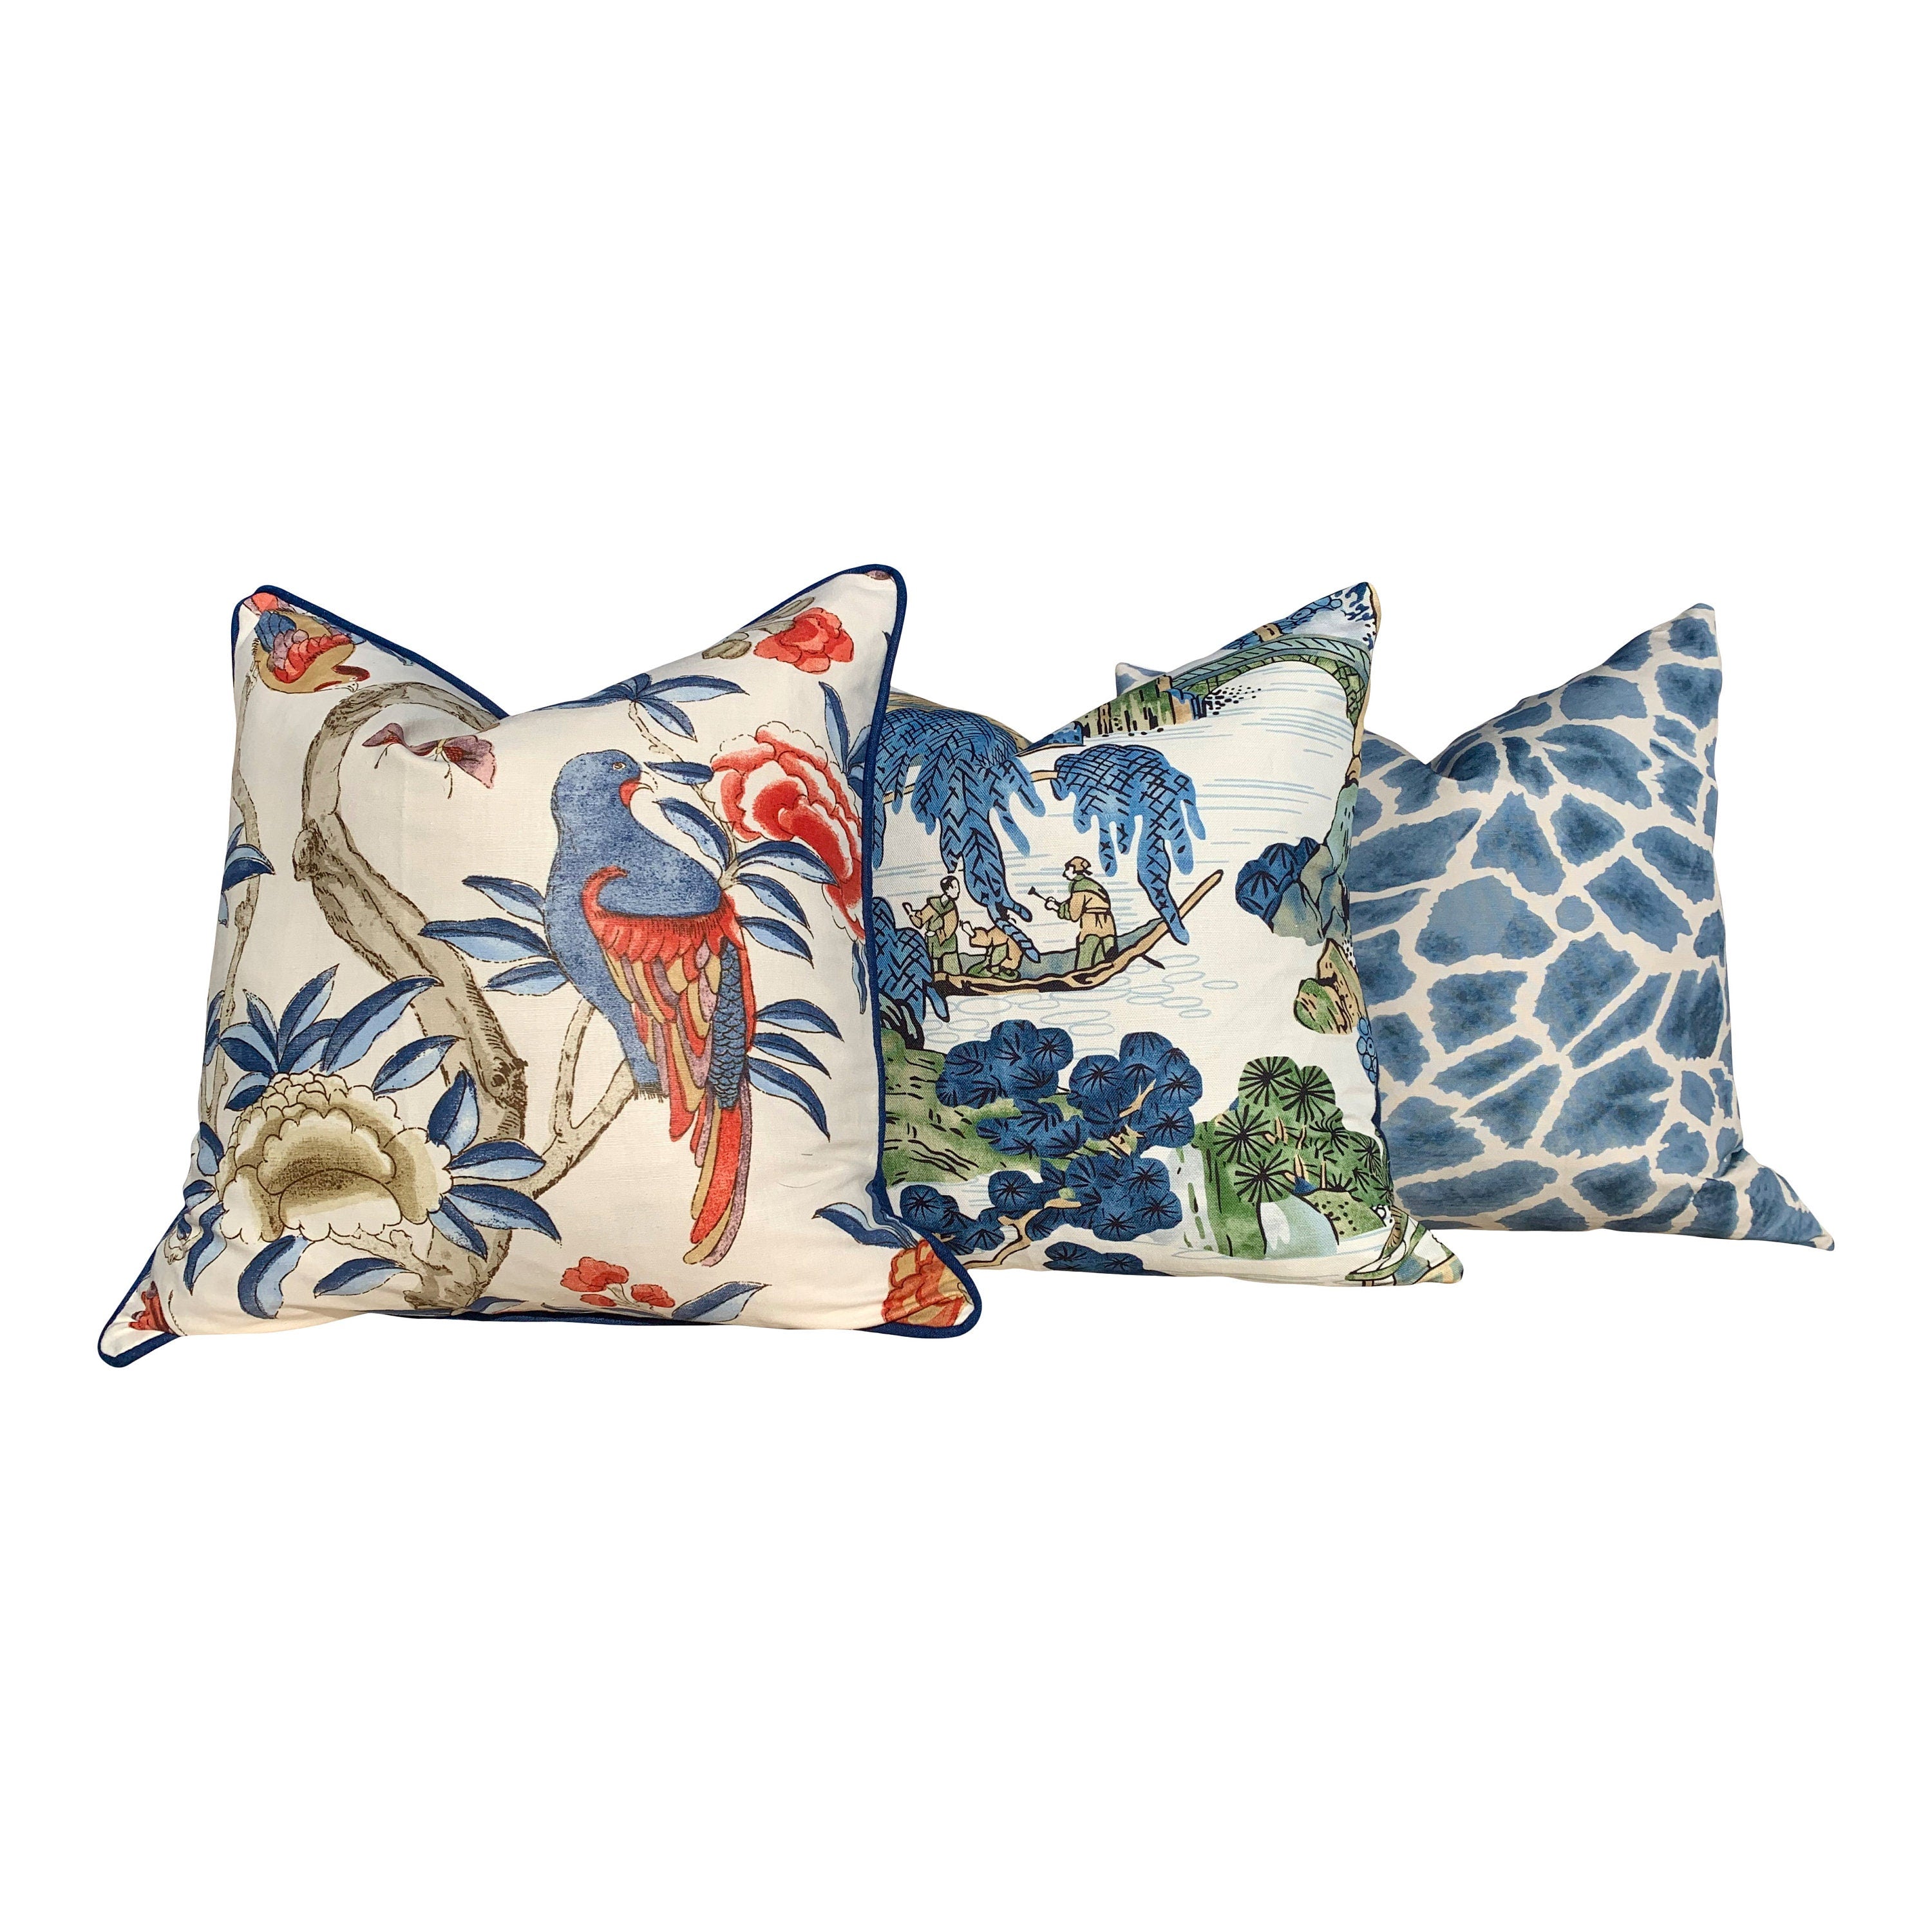 Thibaut Gissele Linen Pillow In Blue and Red, Solid Blue Pipping. Lumbar Tropical Pillow.